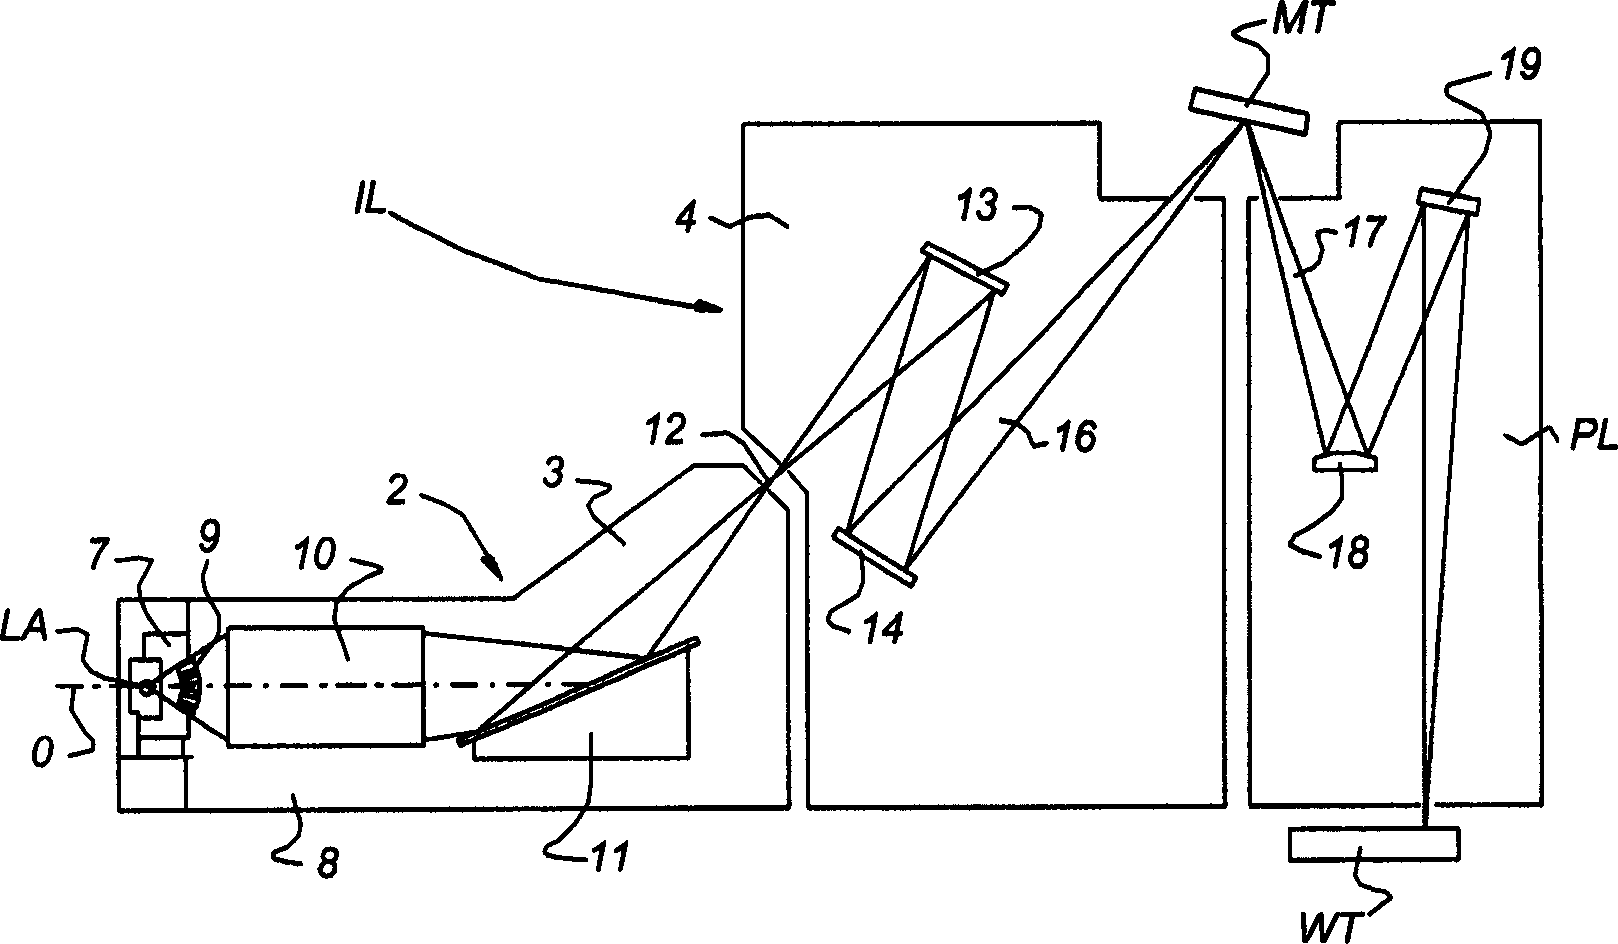 Lithographic printing projector containing secondary electronic clear cell